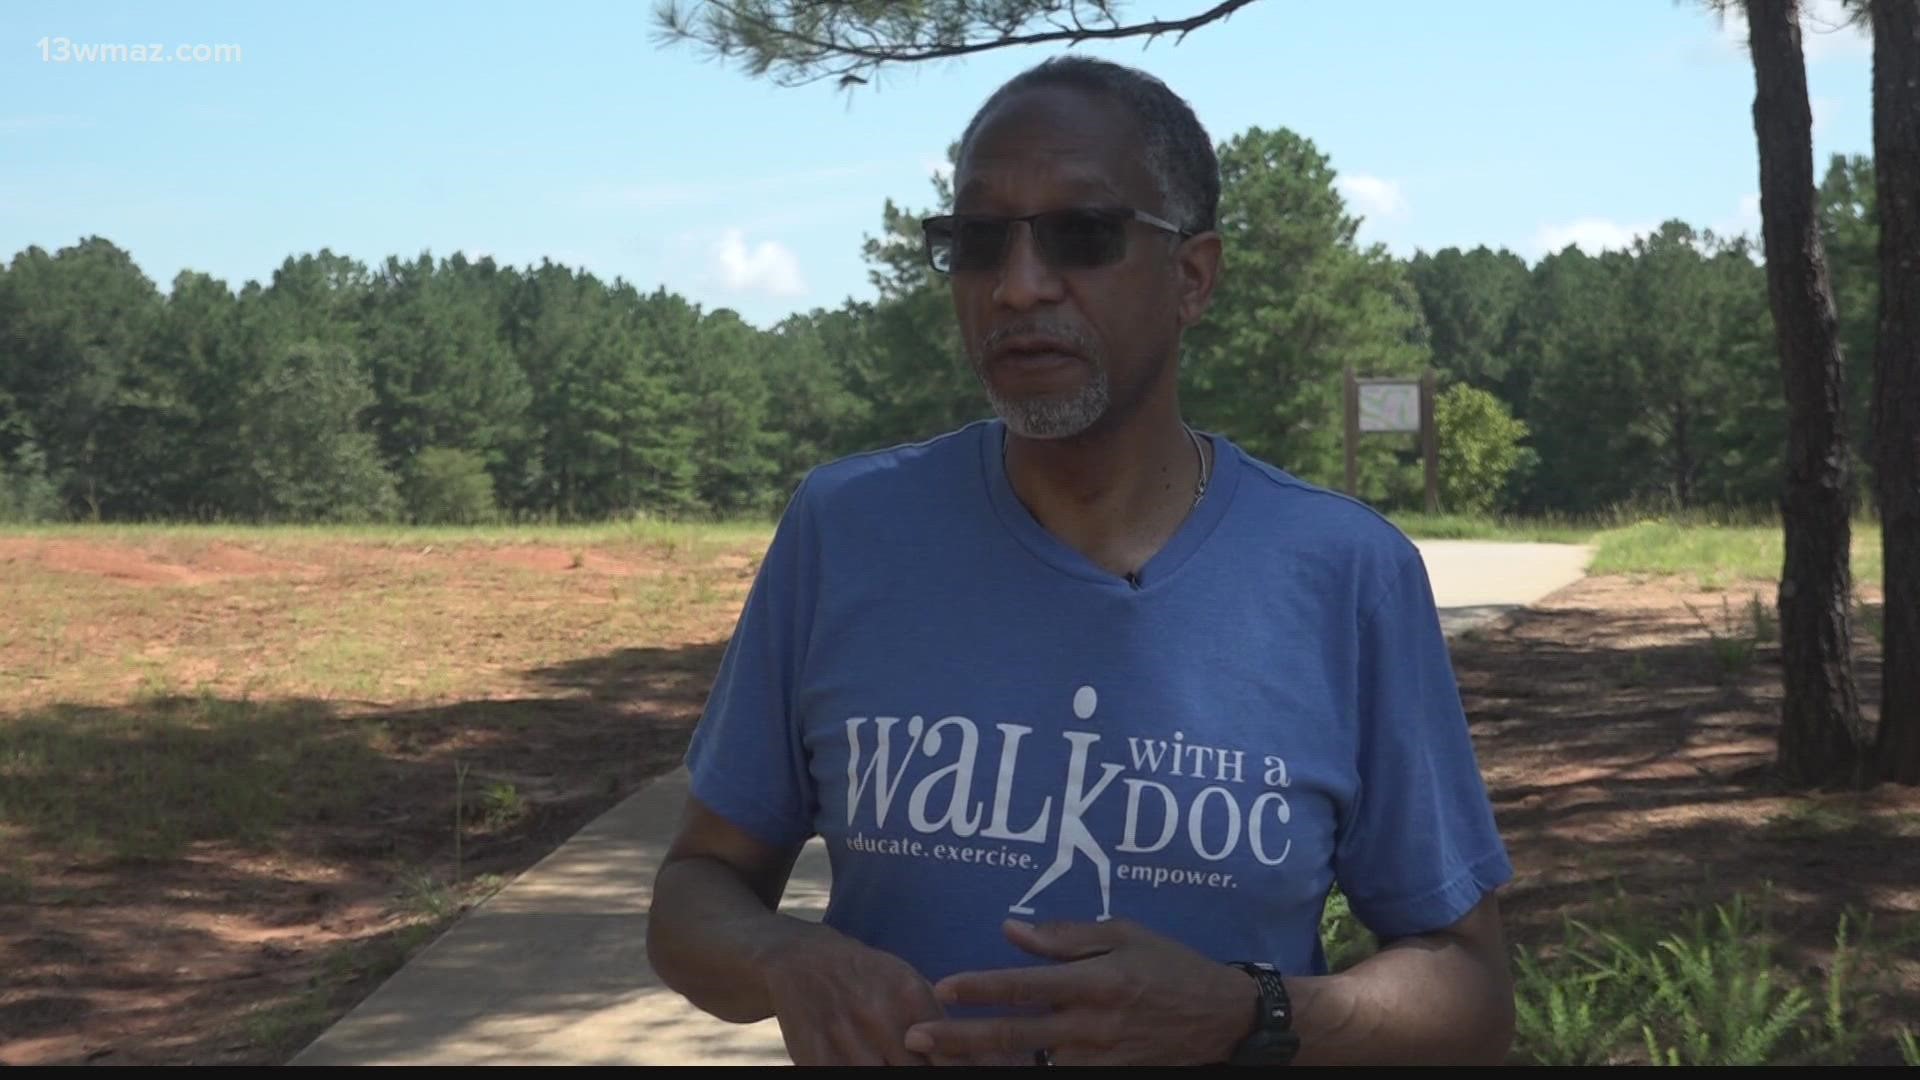 'Walk with a Doc' is a program to promote greater health and wellness by doing scheduled walks.